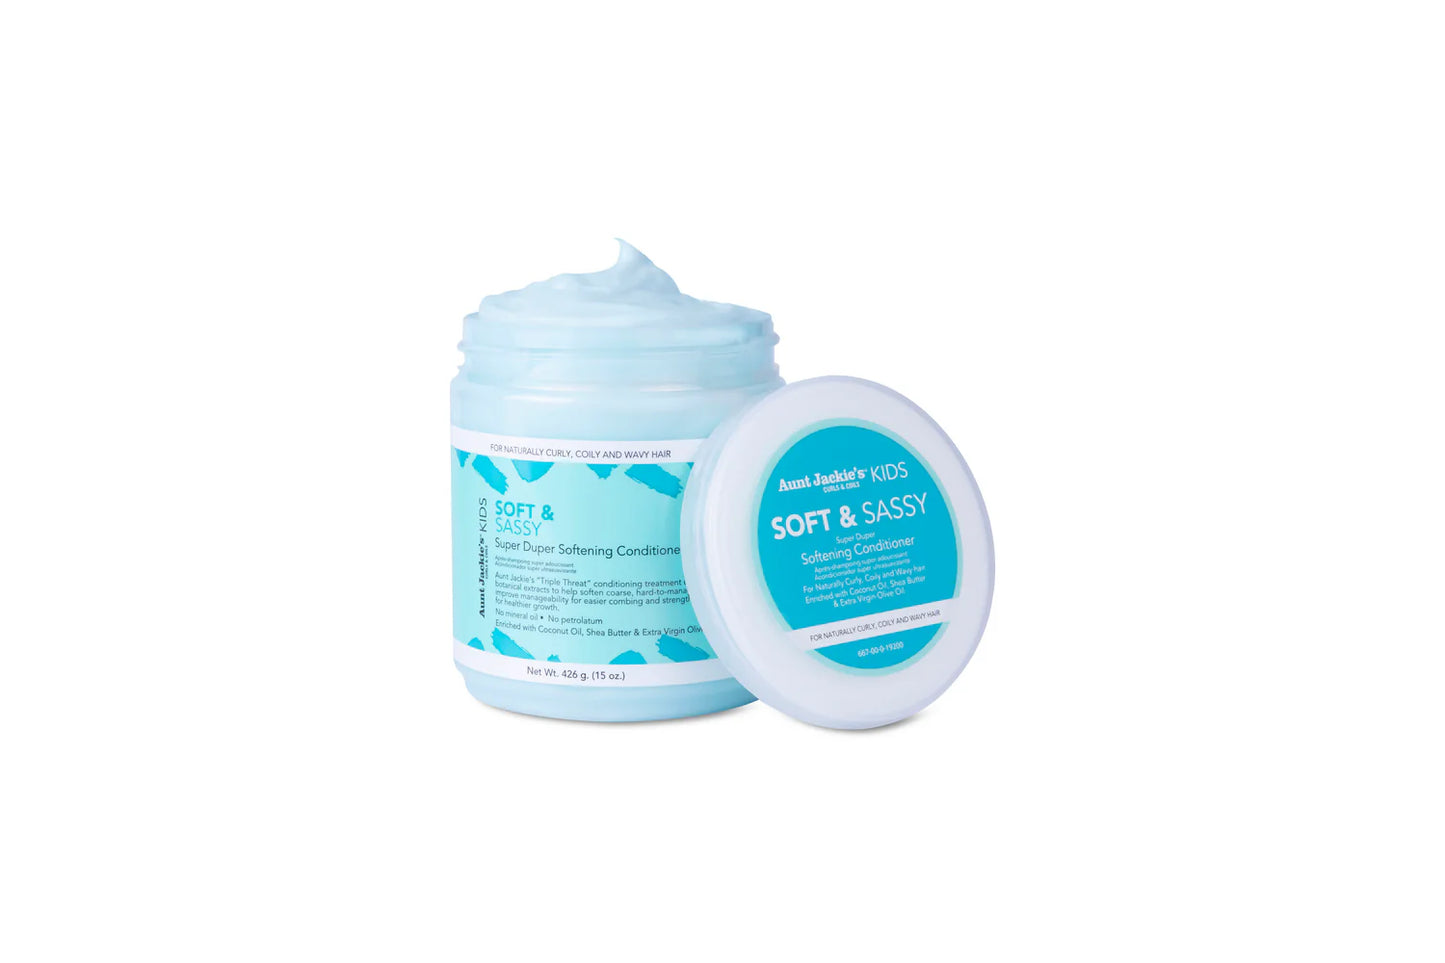 Aunt Jackies Aunt Jackies Soft And Sassy Super Duper Softening Conditioner - Masque super hydratant